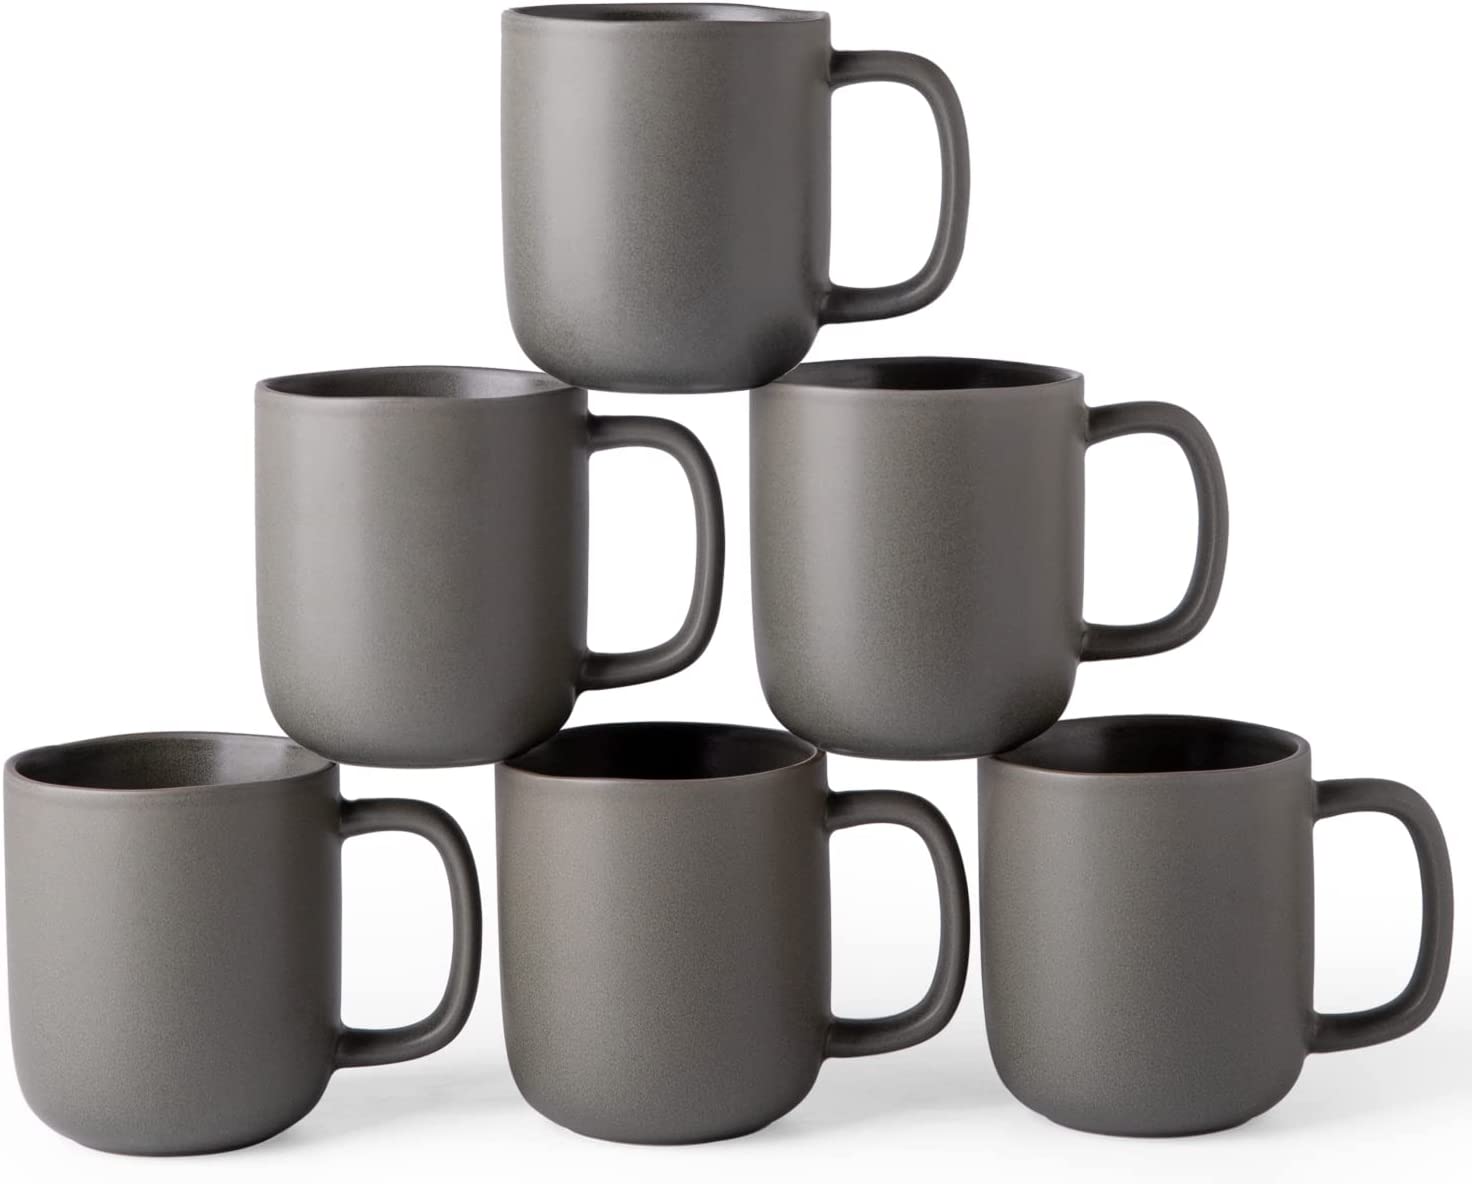  AmorArc 16oz Coffee Mugs Set of 6, Large Ceramic Coffee Mugs  for Man, Woman, Dad, Mom, Modern Coffee Mugs Set with handle for  Tea/Latte/Cappuccino/Milk/Cocoa. Dishwasher&Microwave Safe, Multi : Home &  Kitchen